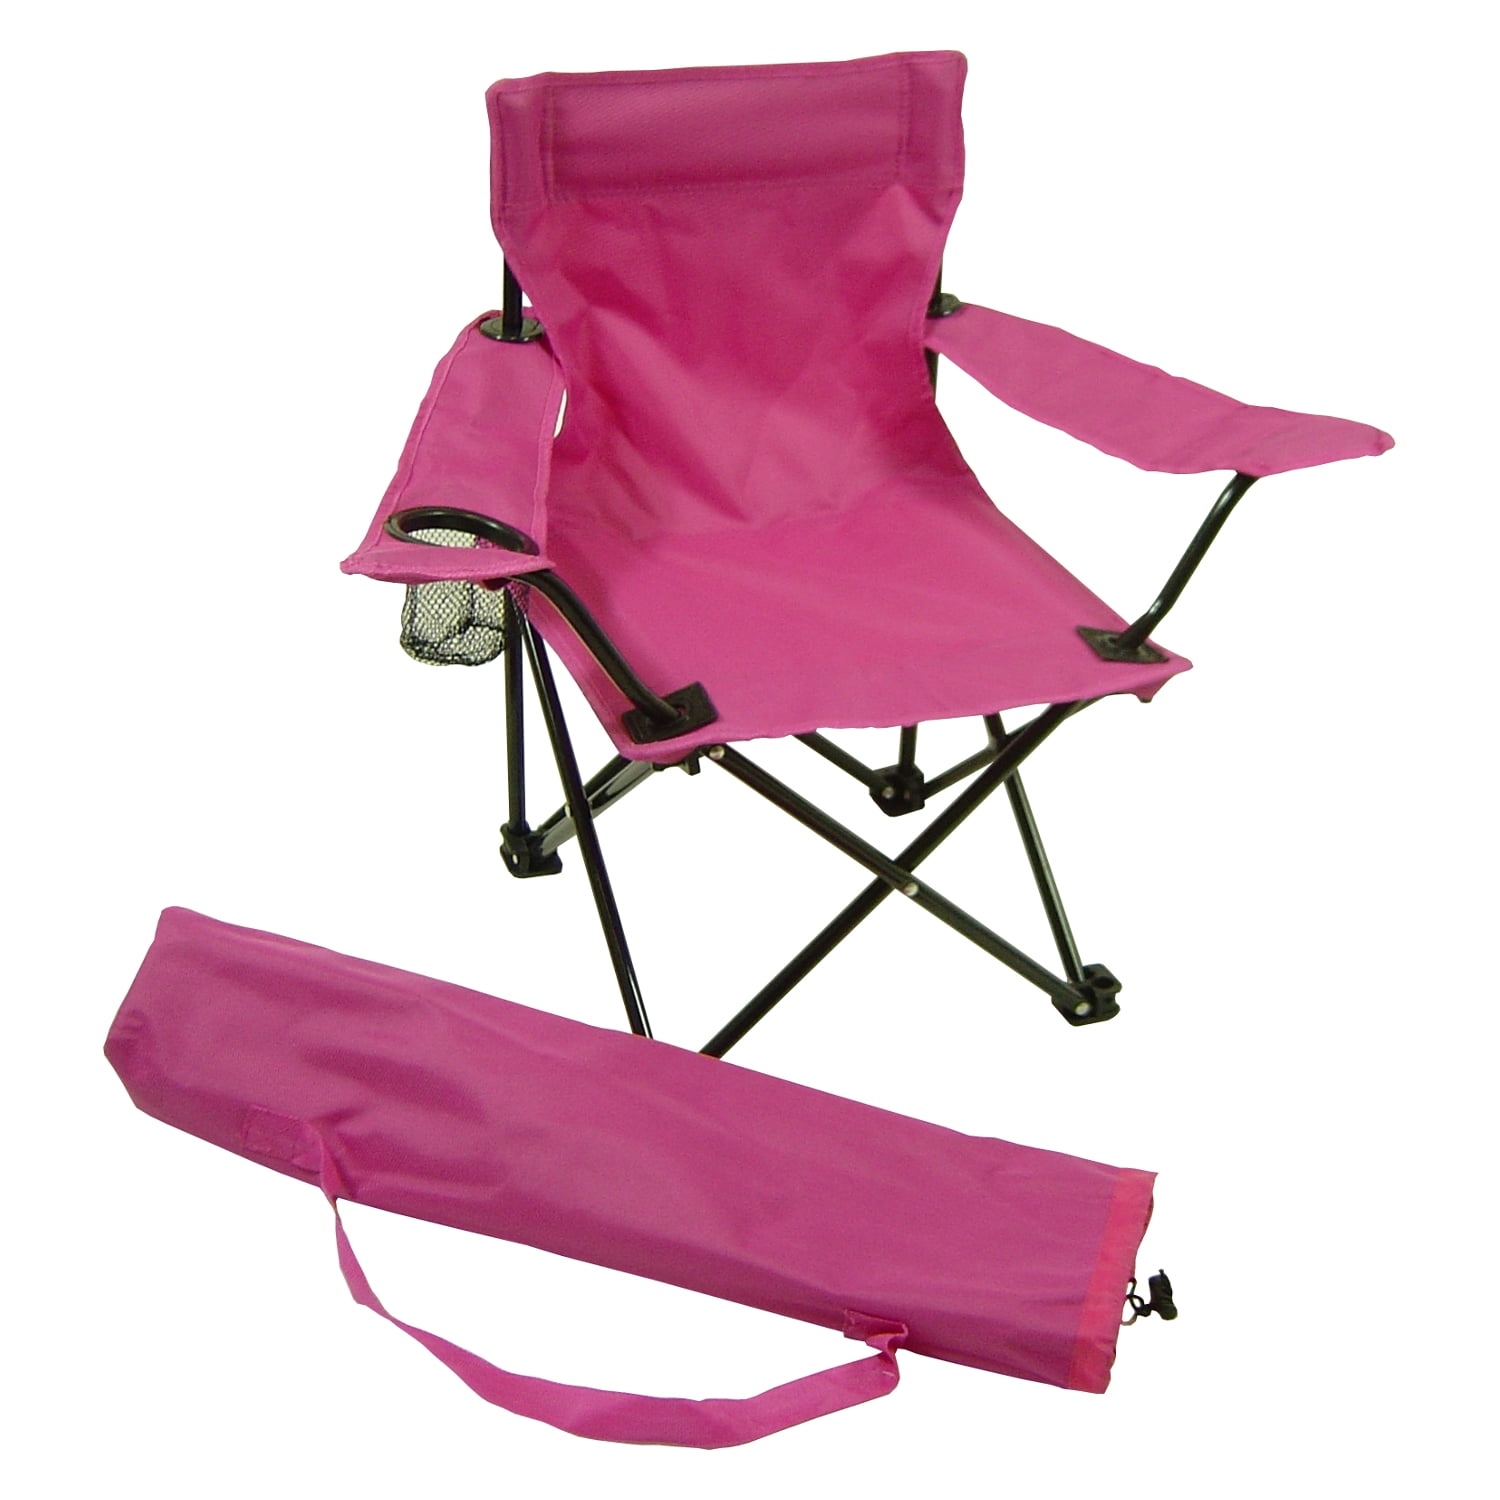 Details about   Crckt Kids Folding Camp Chair with Safety Lock 125lb Capacity Unicorn Print 